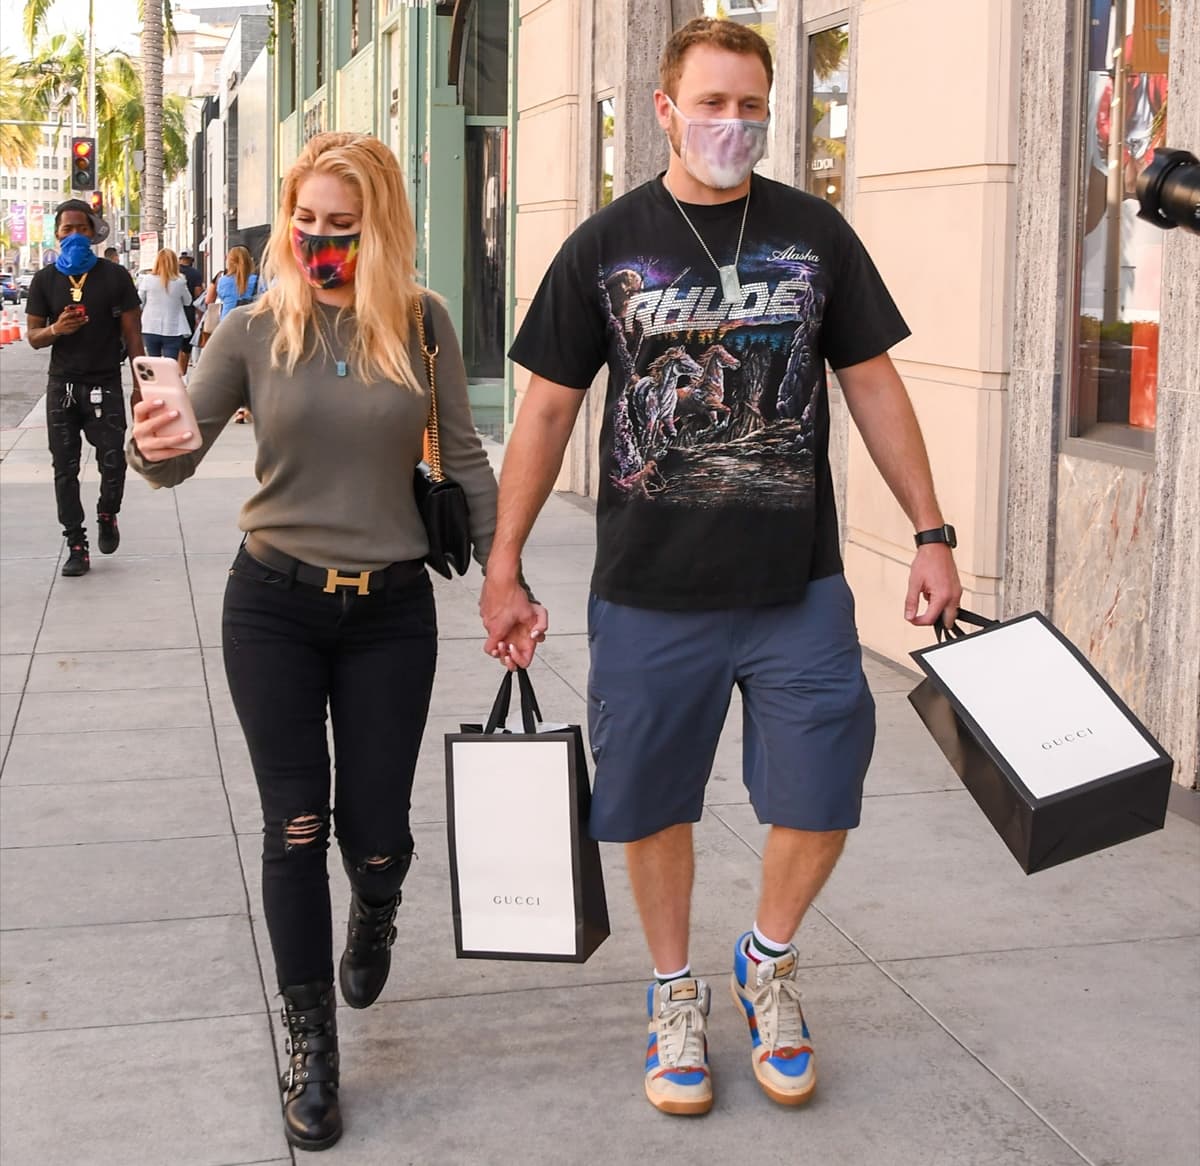 Heidi Montag and Spencer Pratt are seen out shopping